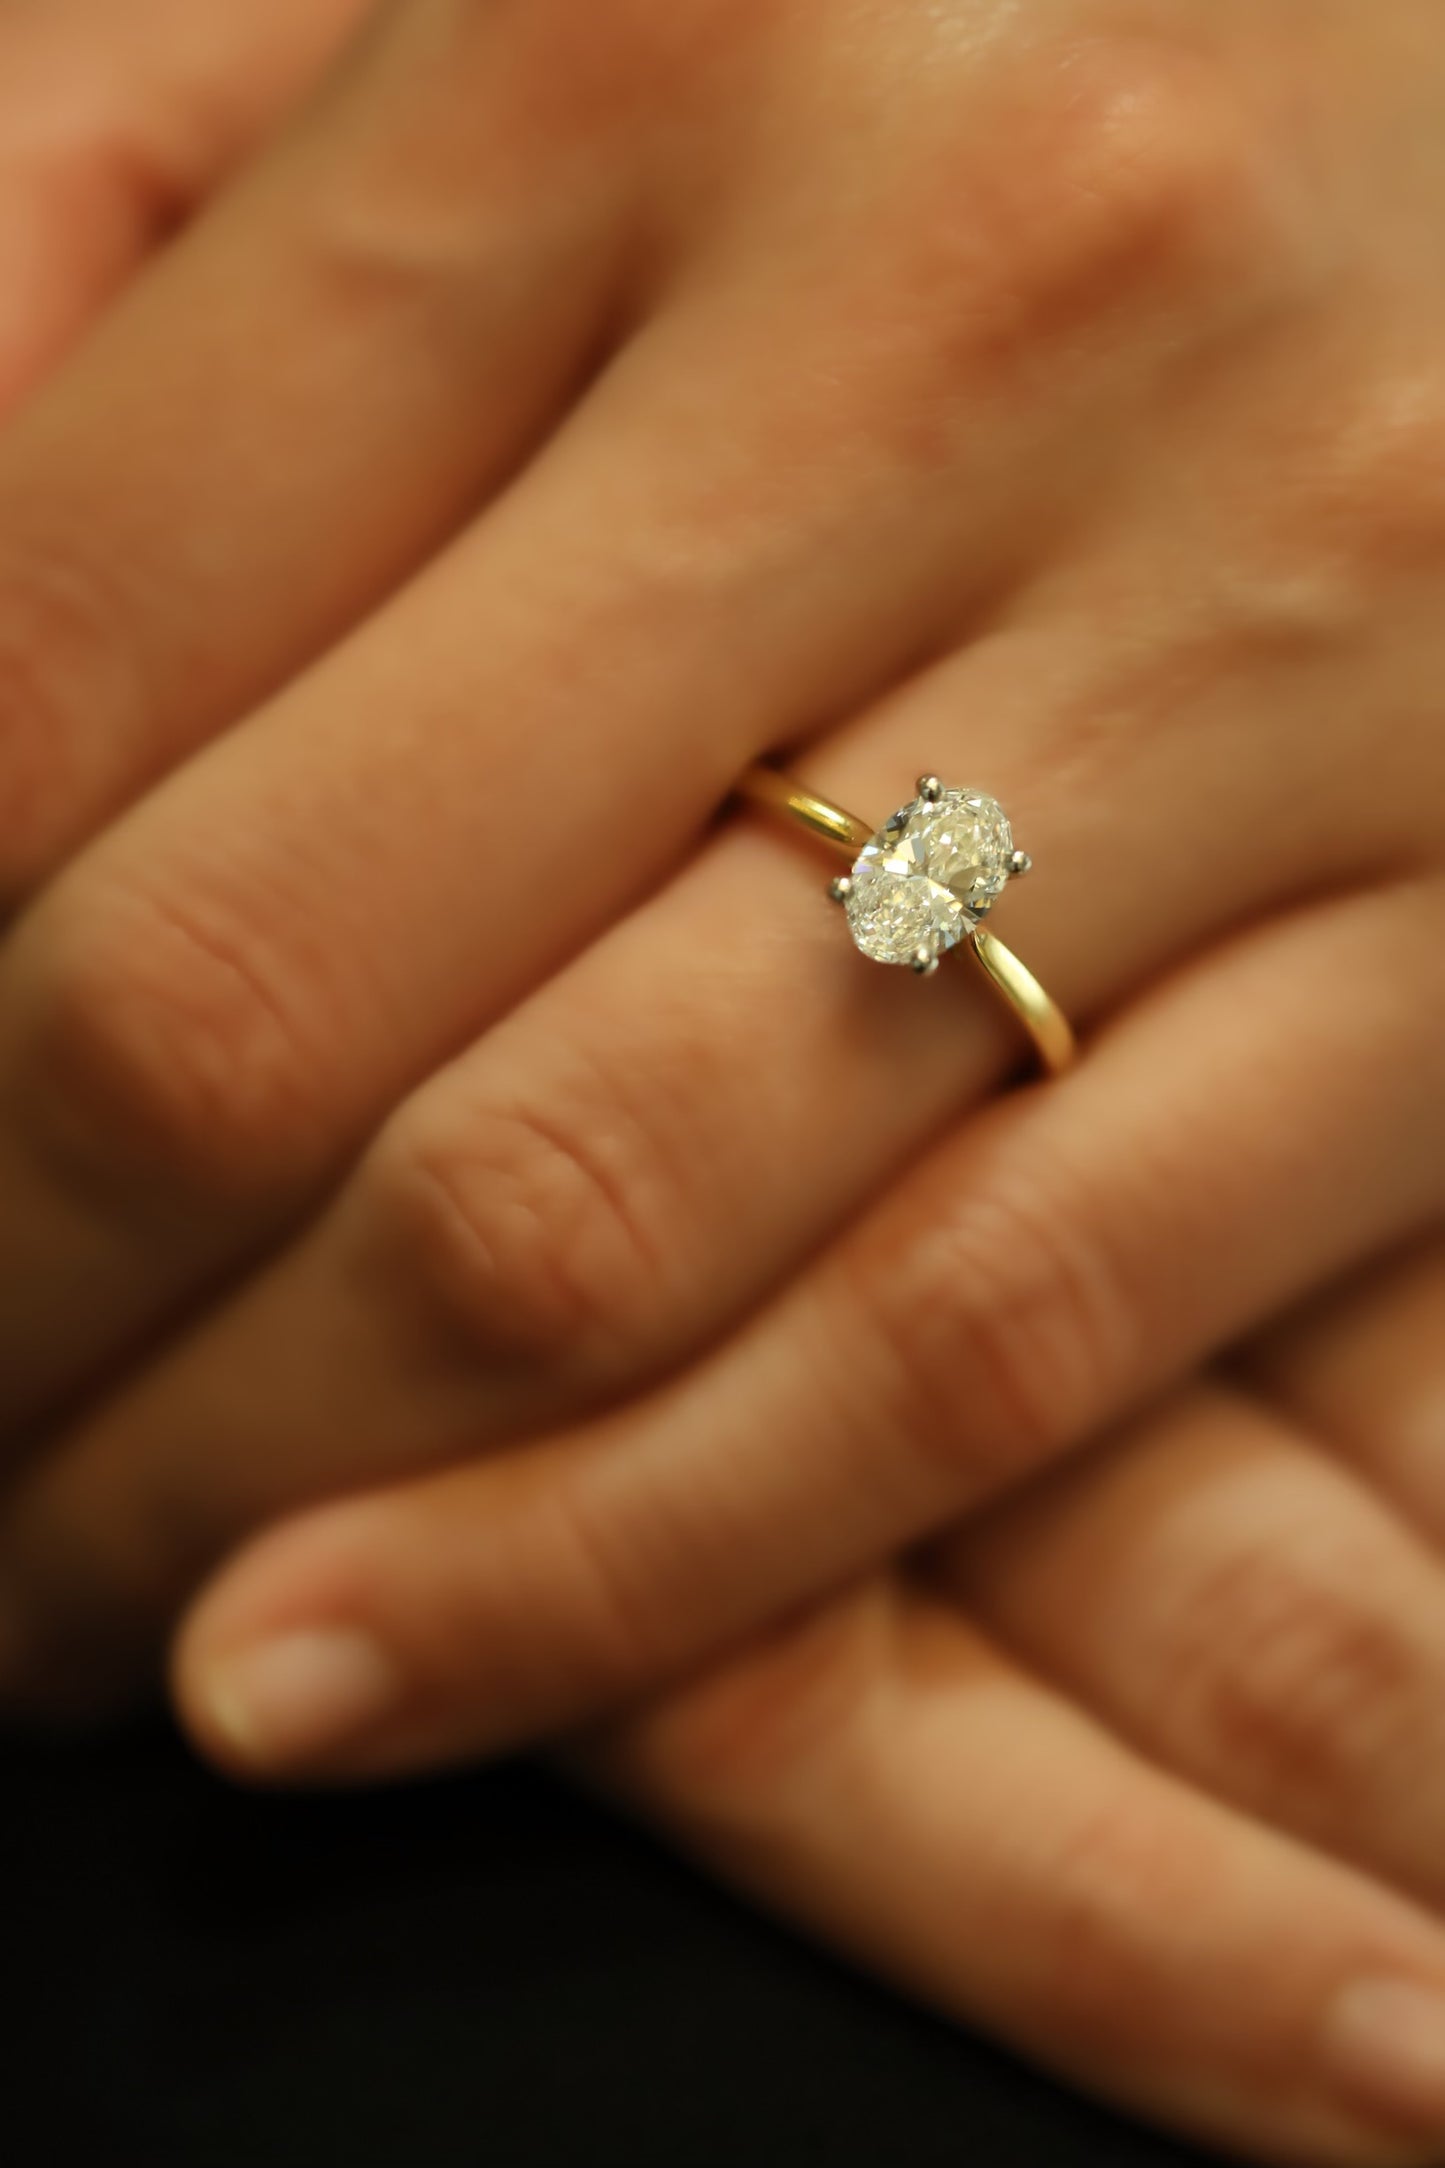 The "J'adore" Oval Solitaire, Yellow Gold